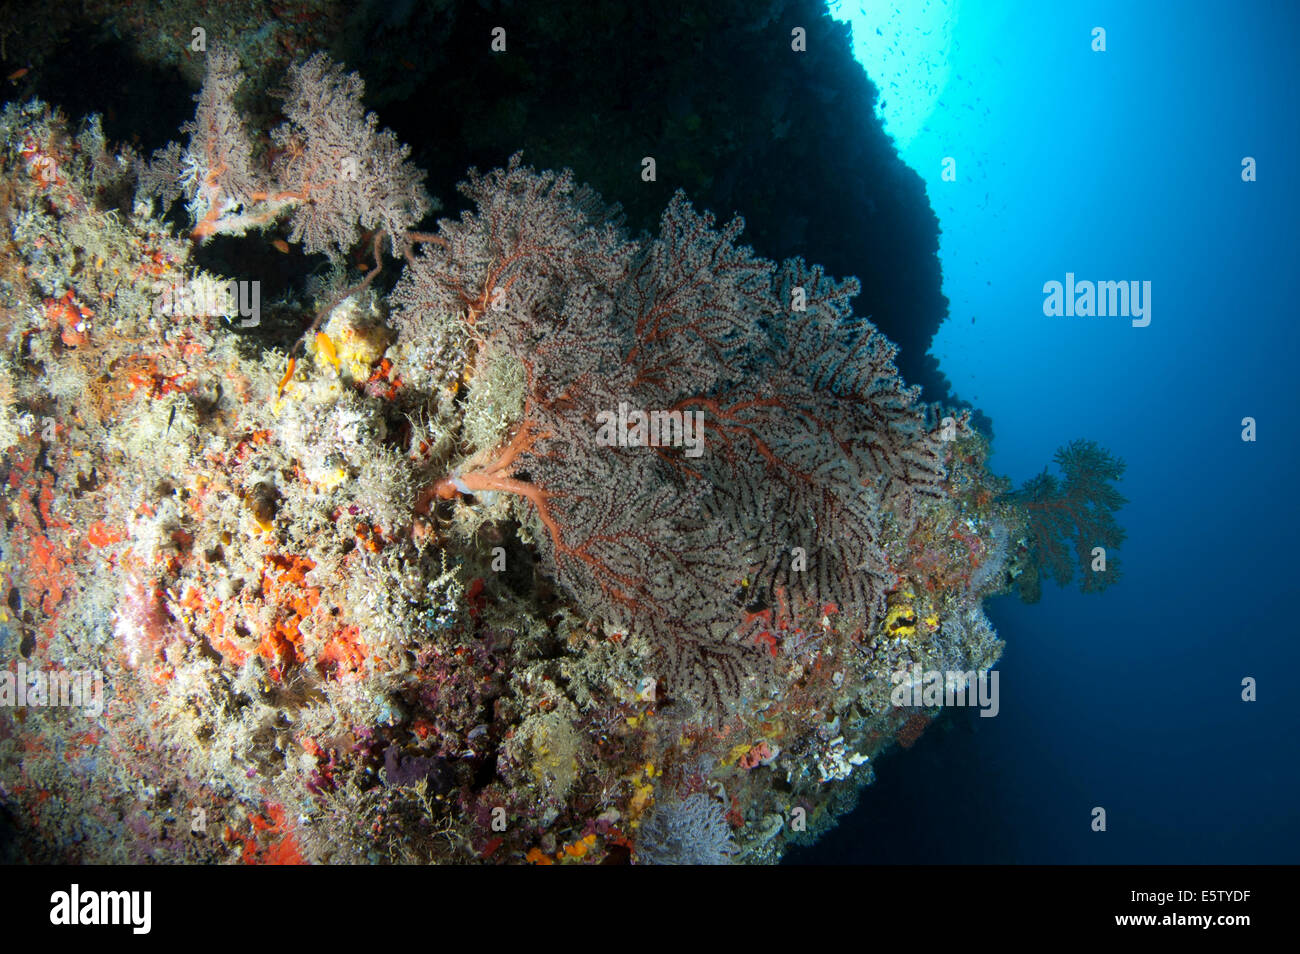 Colouful soft corals encrusting a coral reef in Dhaalu Atoll Stock Photo